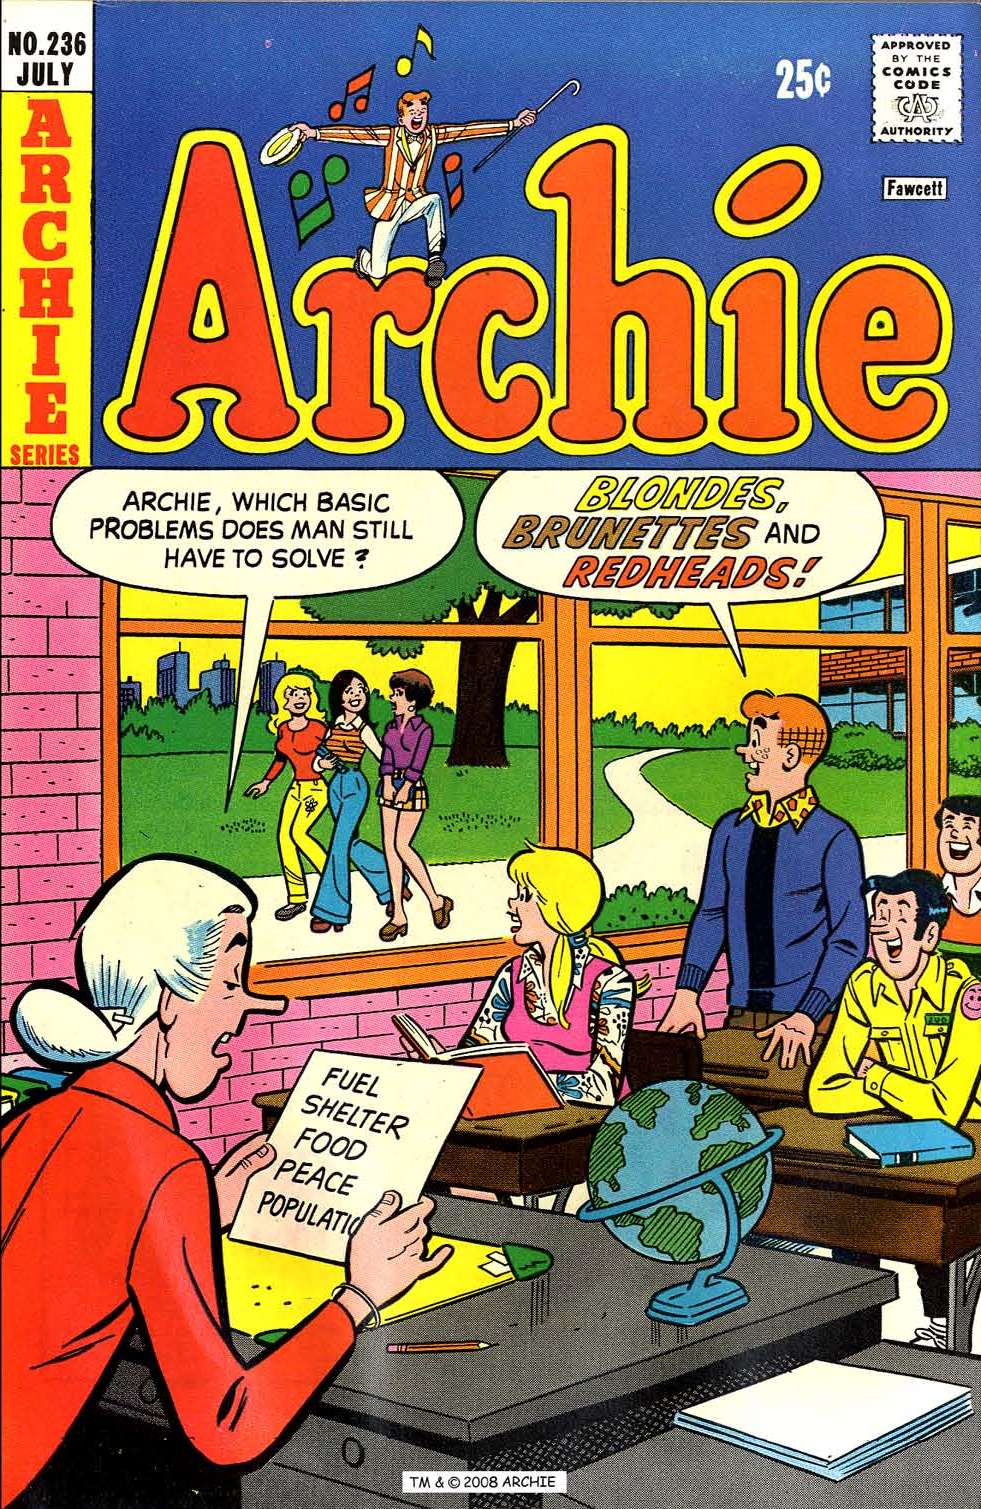 Read online Archie (1960) comic -  Issue #236 - 1